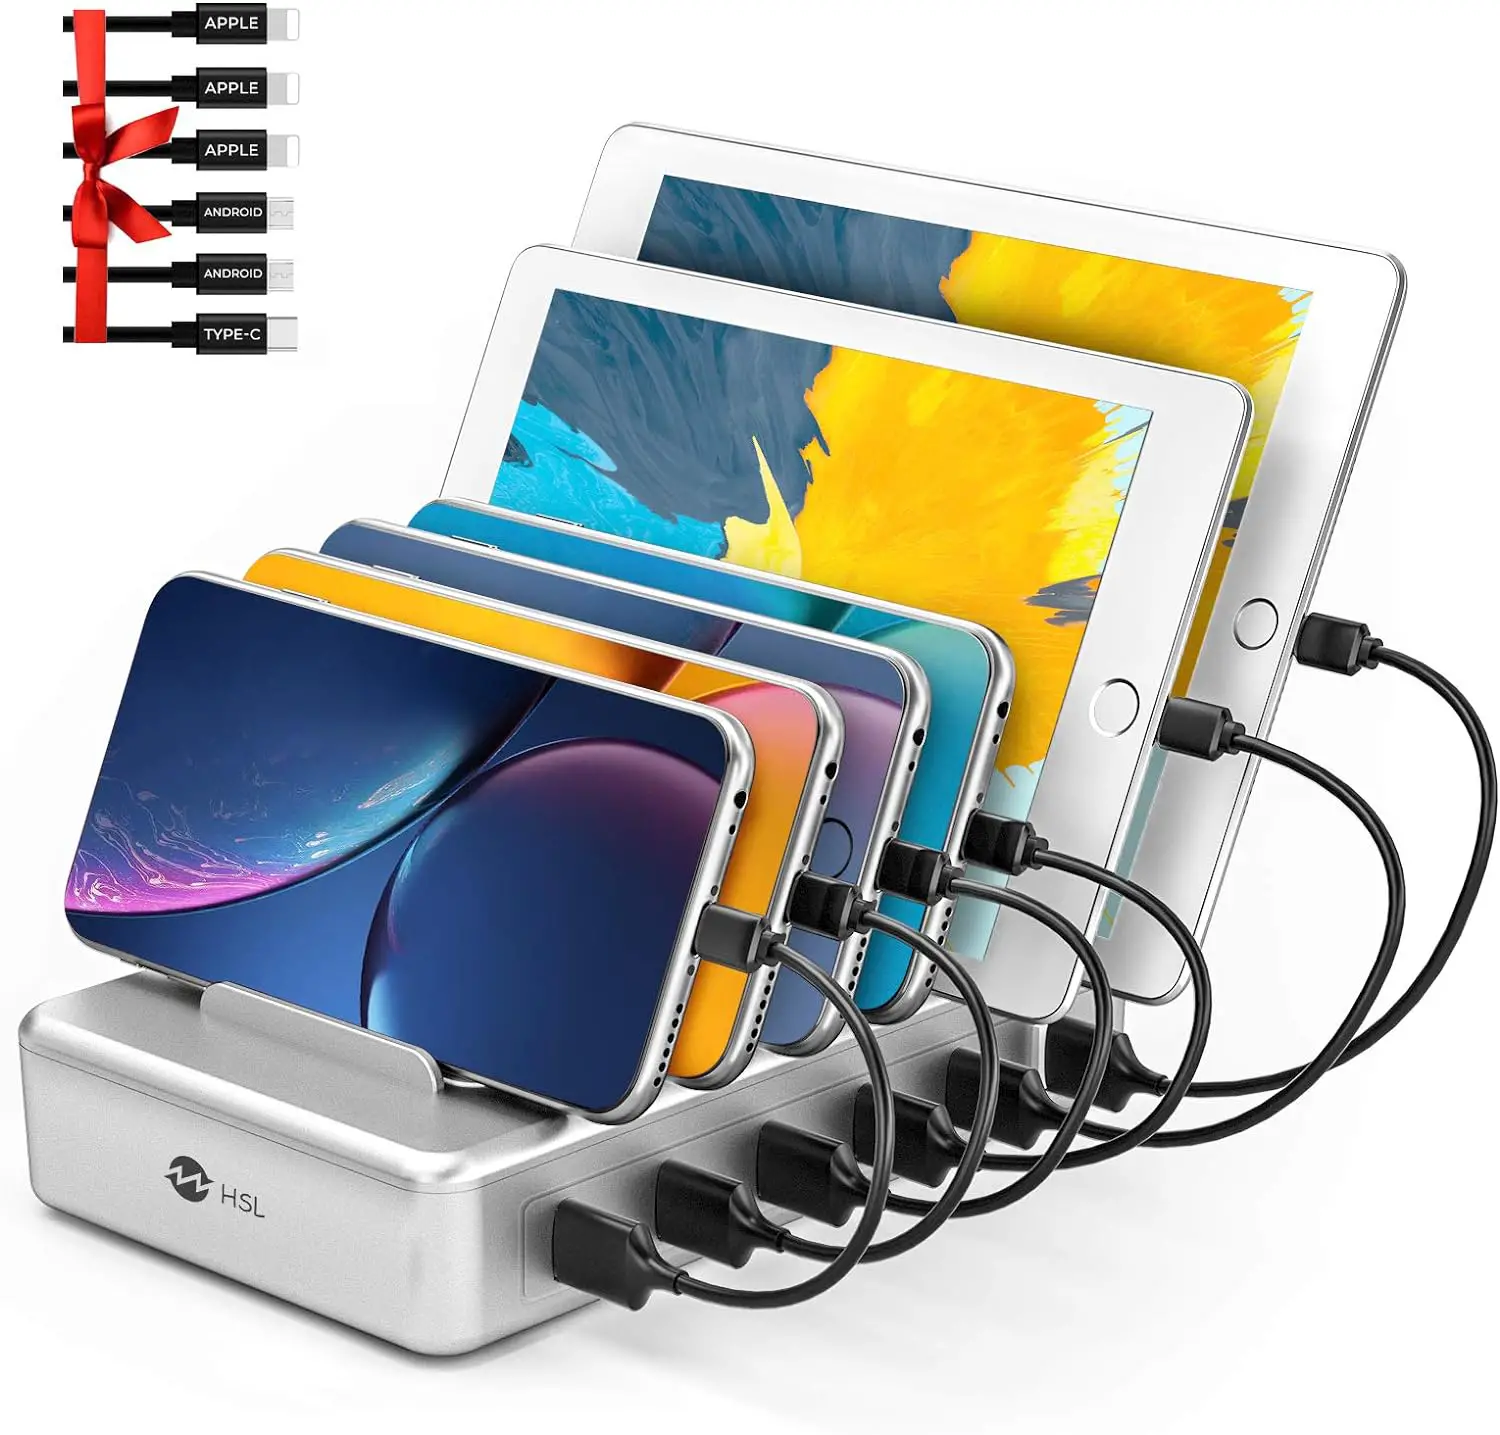 Charging Station for Multiple Devices - 6 Port Fast Charging Station for iPhone iPad Android and Tablet - Multi Charging Station - Phone Charging Station with 6 Mixed Cables Included(UL Certified)